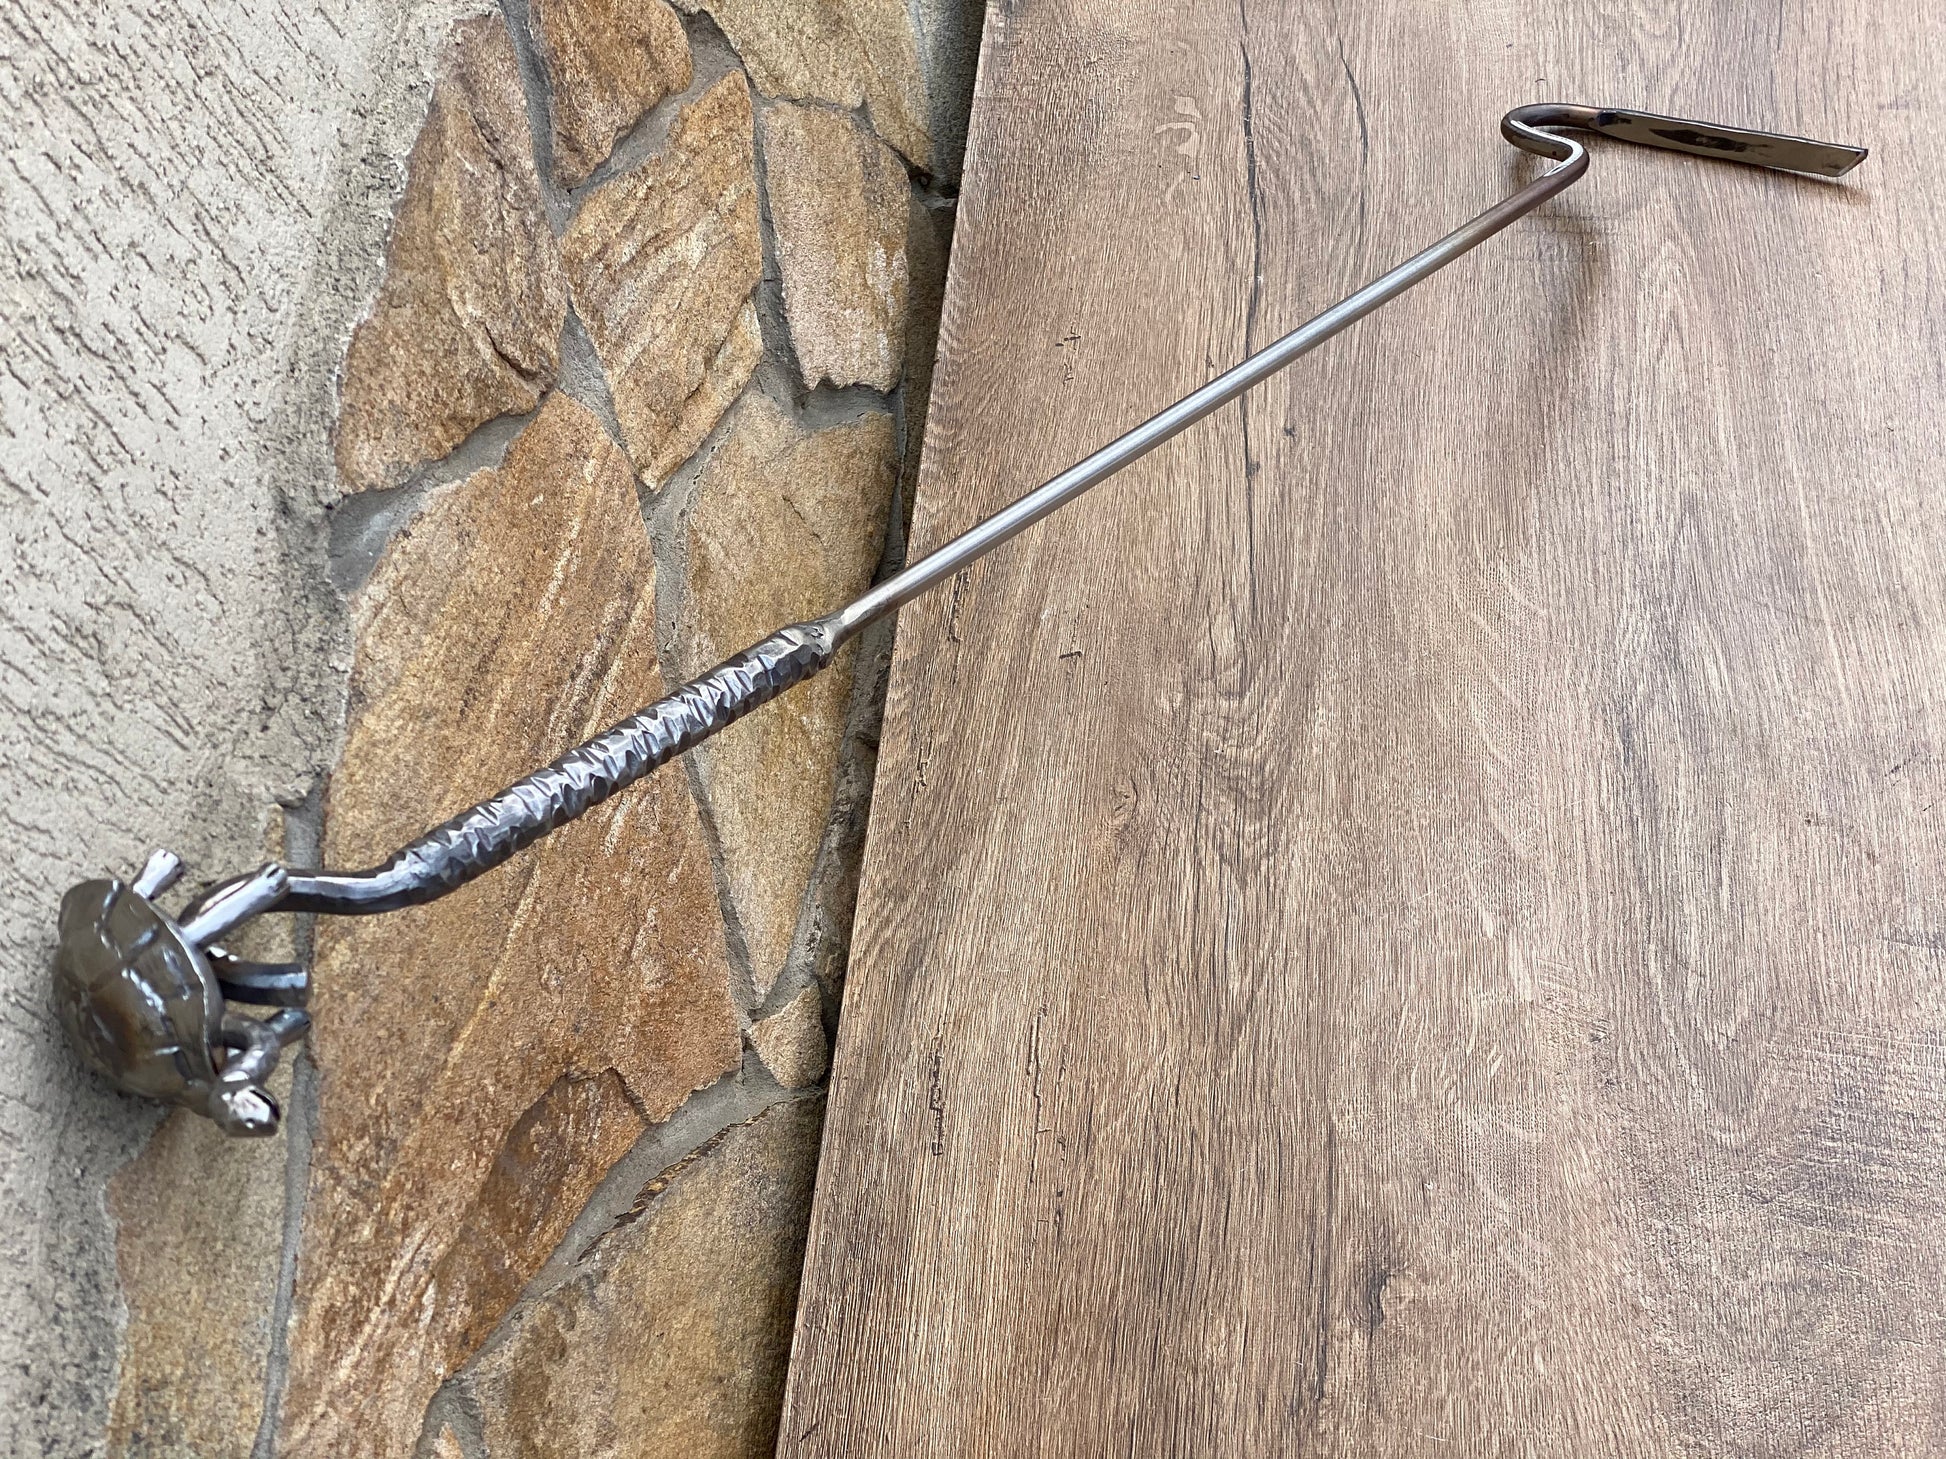 Stainless steel fire poker, personalized fire poker, fire poker, turtle, Christmas, mens gift, grilling gift, fireplace, birthday,steel gift